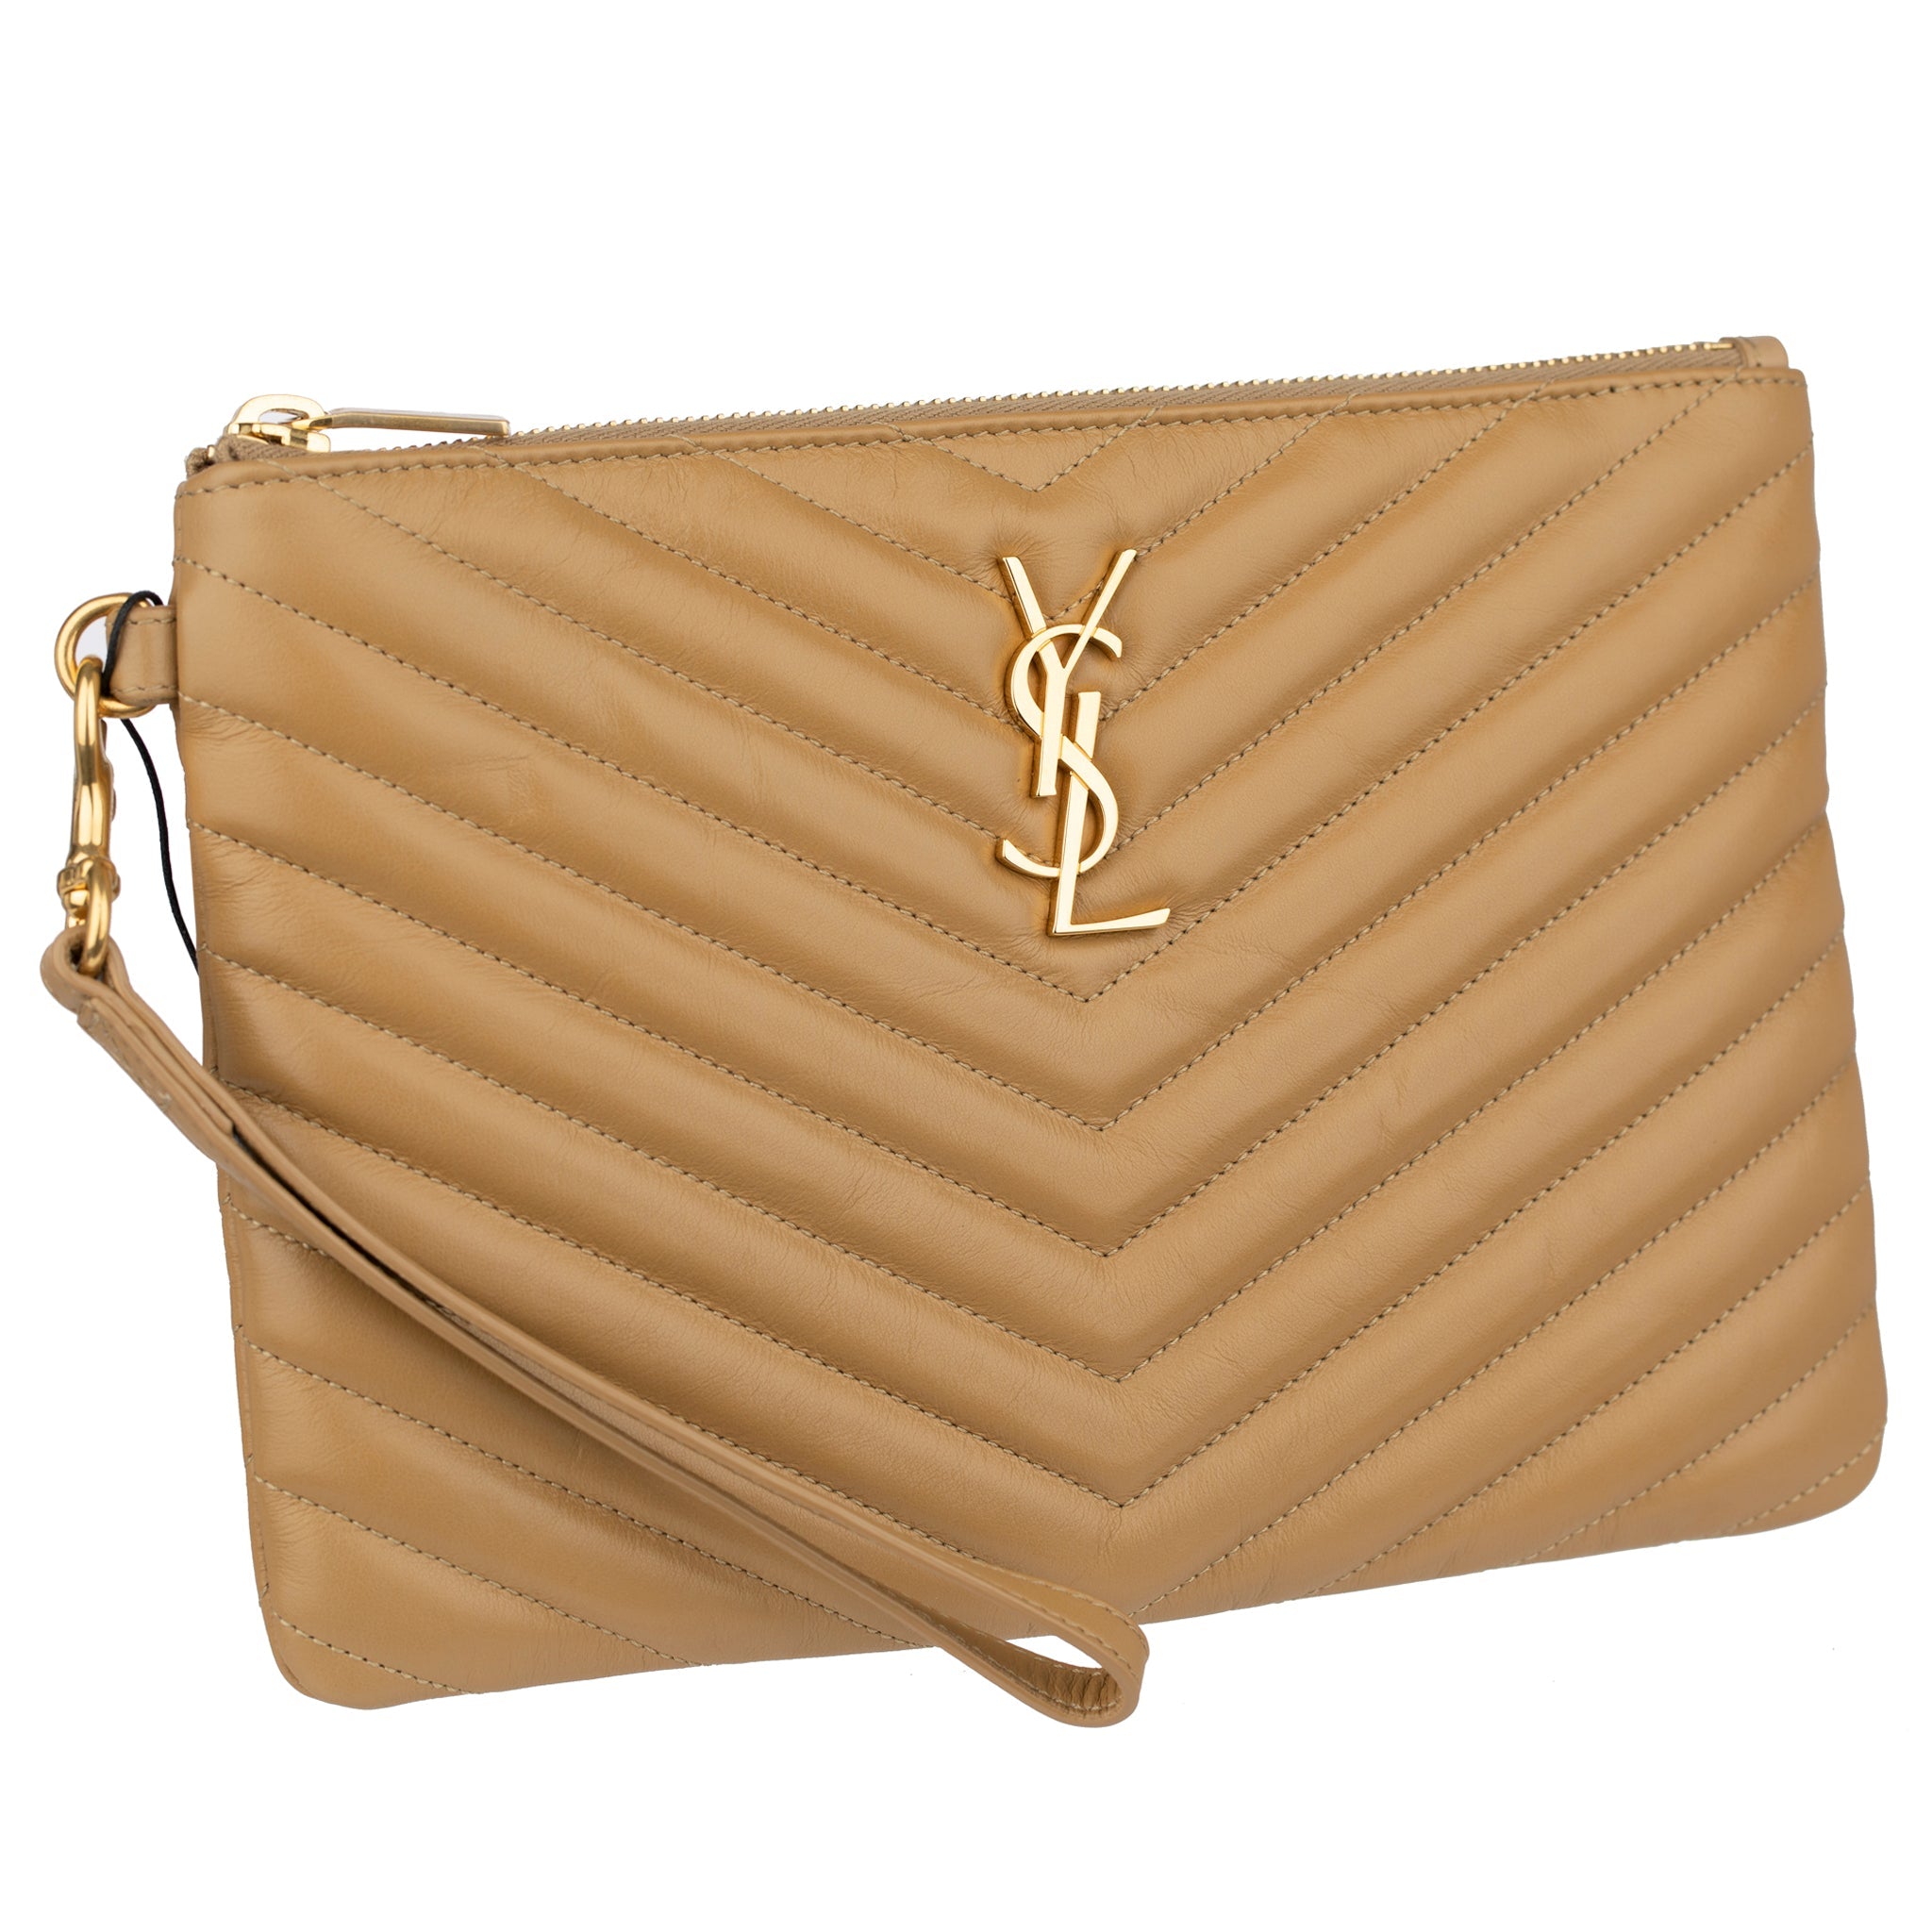 Yves Saint Laurent Beige Leather Quilted Pouch - On Repeat